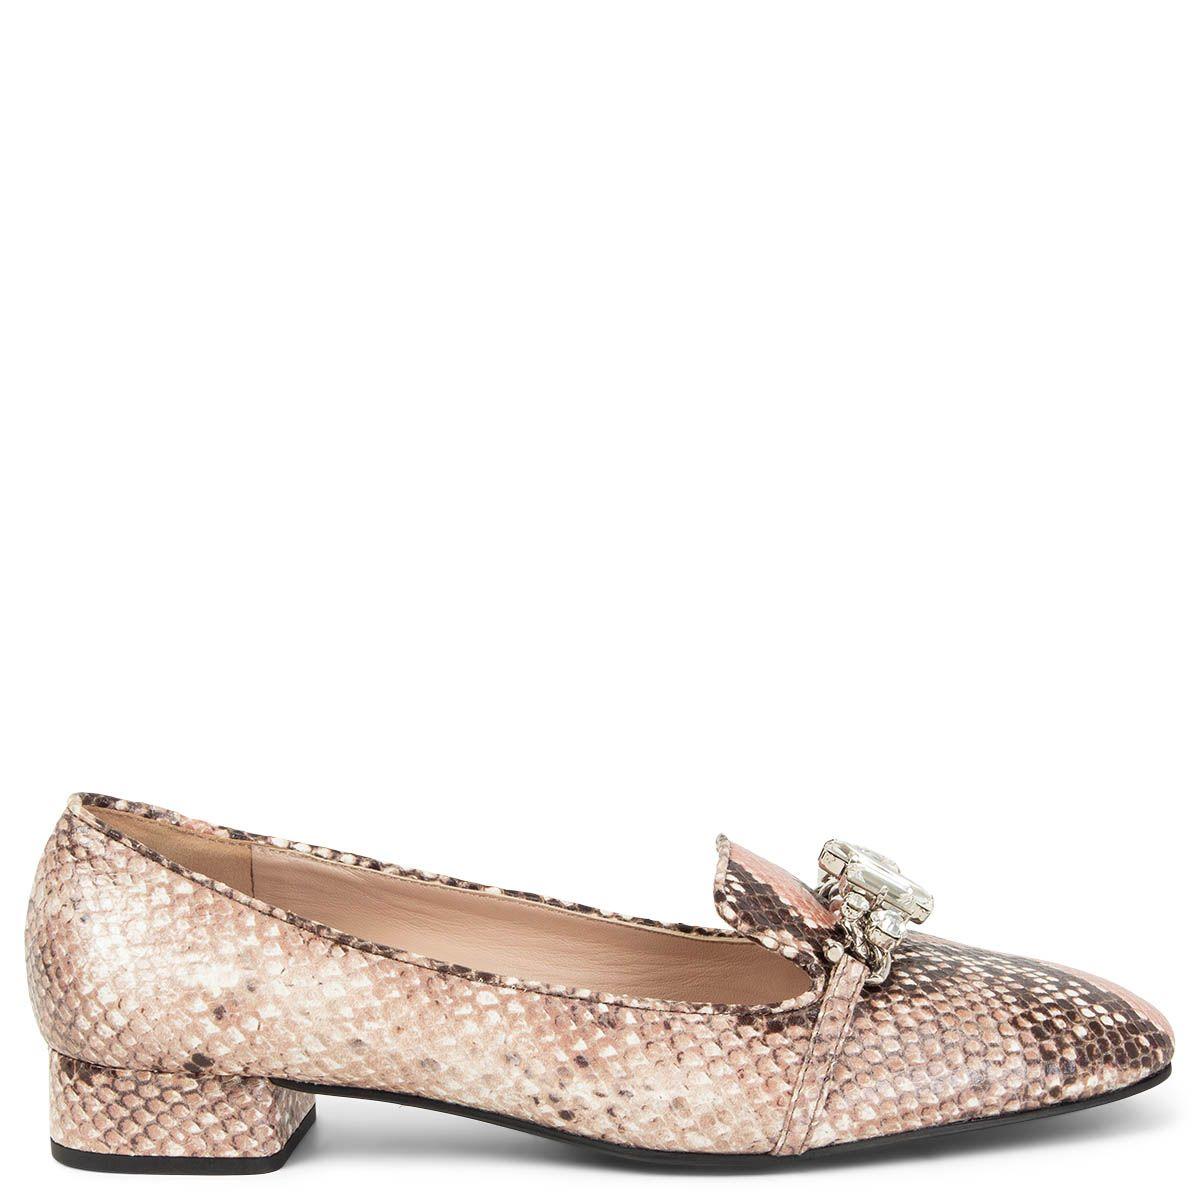 MIU MIU dusty pink CRYSTAL EMBELLISHED FAUX PYTHON Loafers Shoes 39.5 For Sale